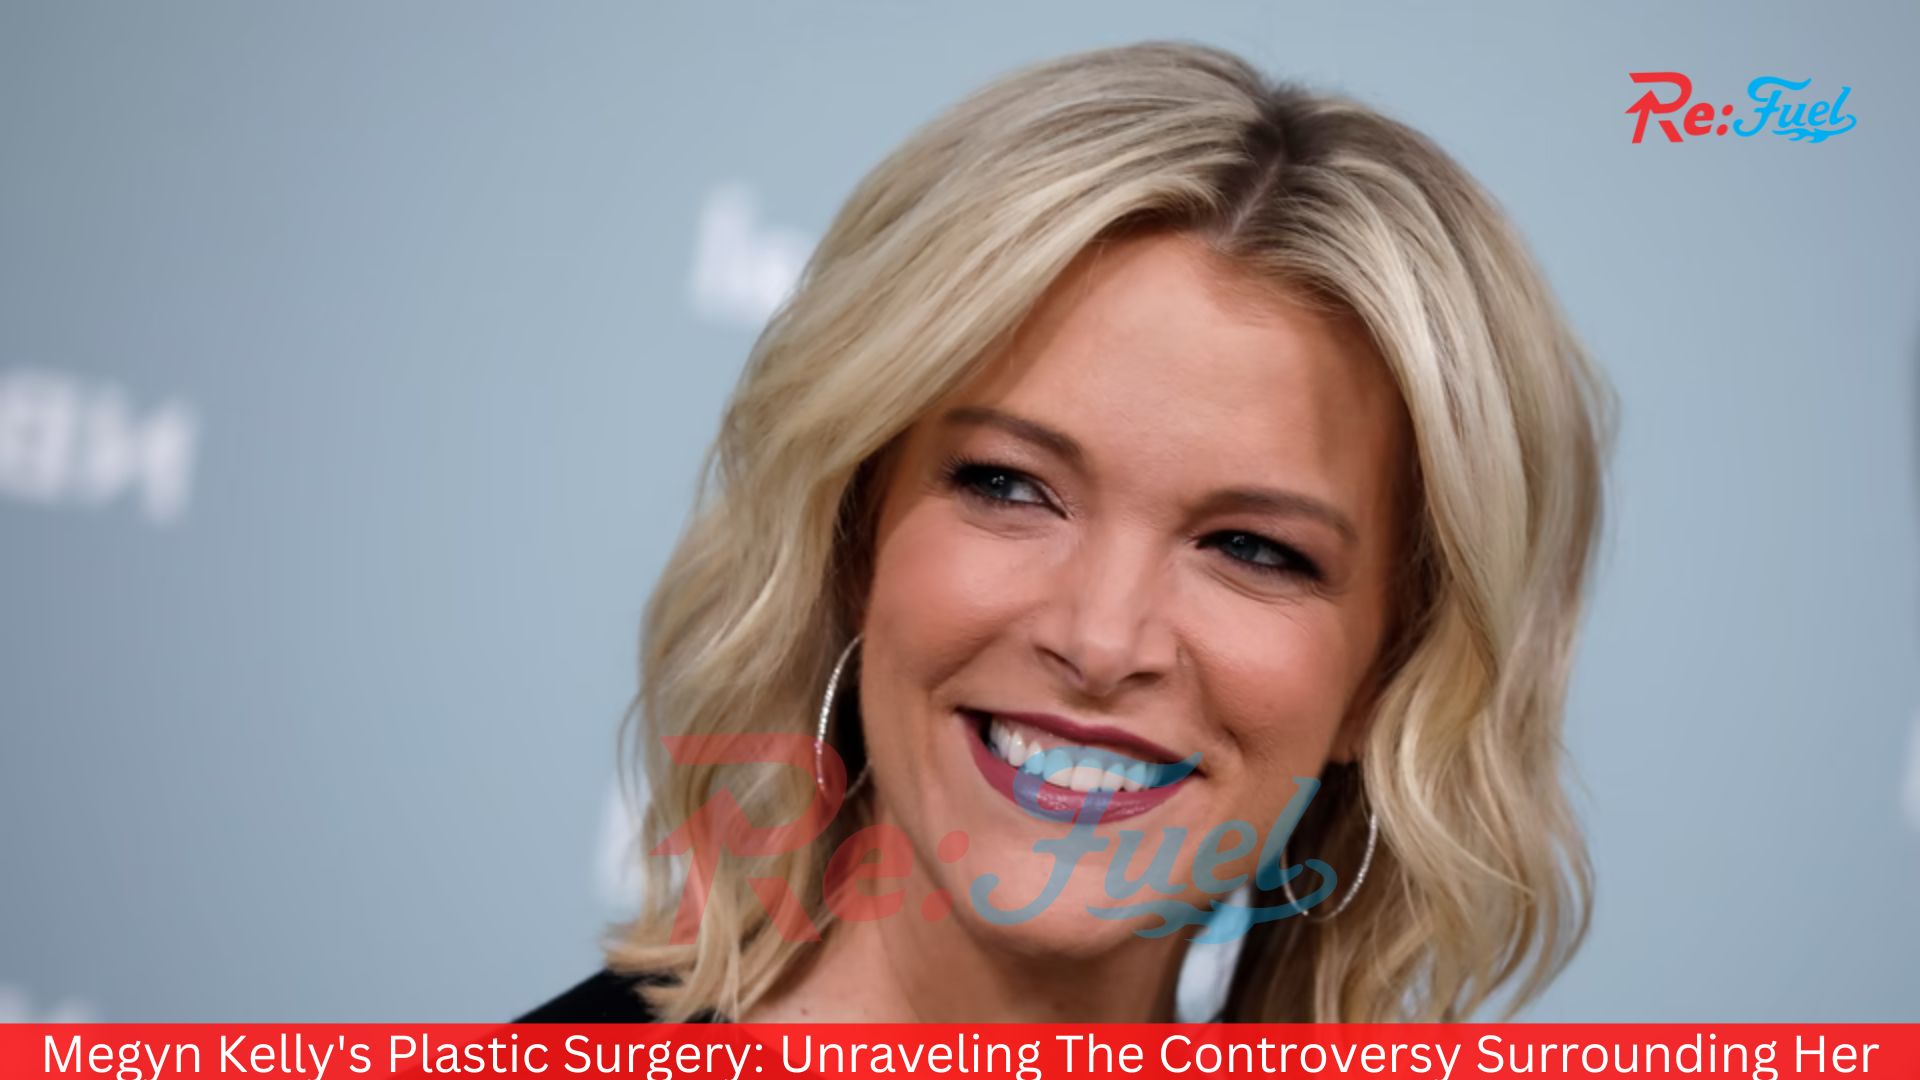 Megyn Kelly's Plastic Surgery: Unraveling The Controversy Surrounding Her